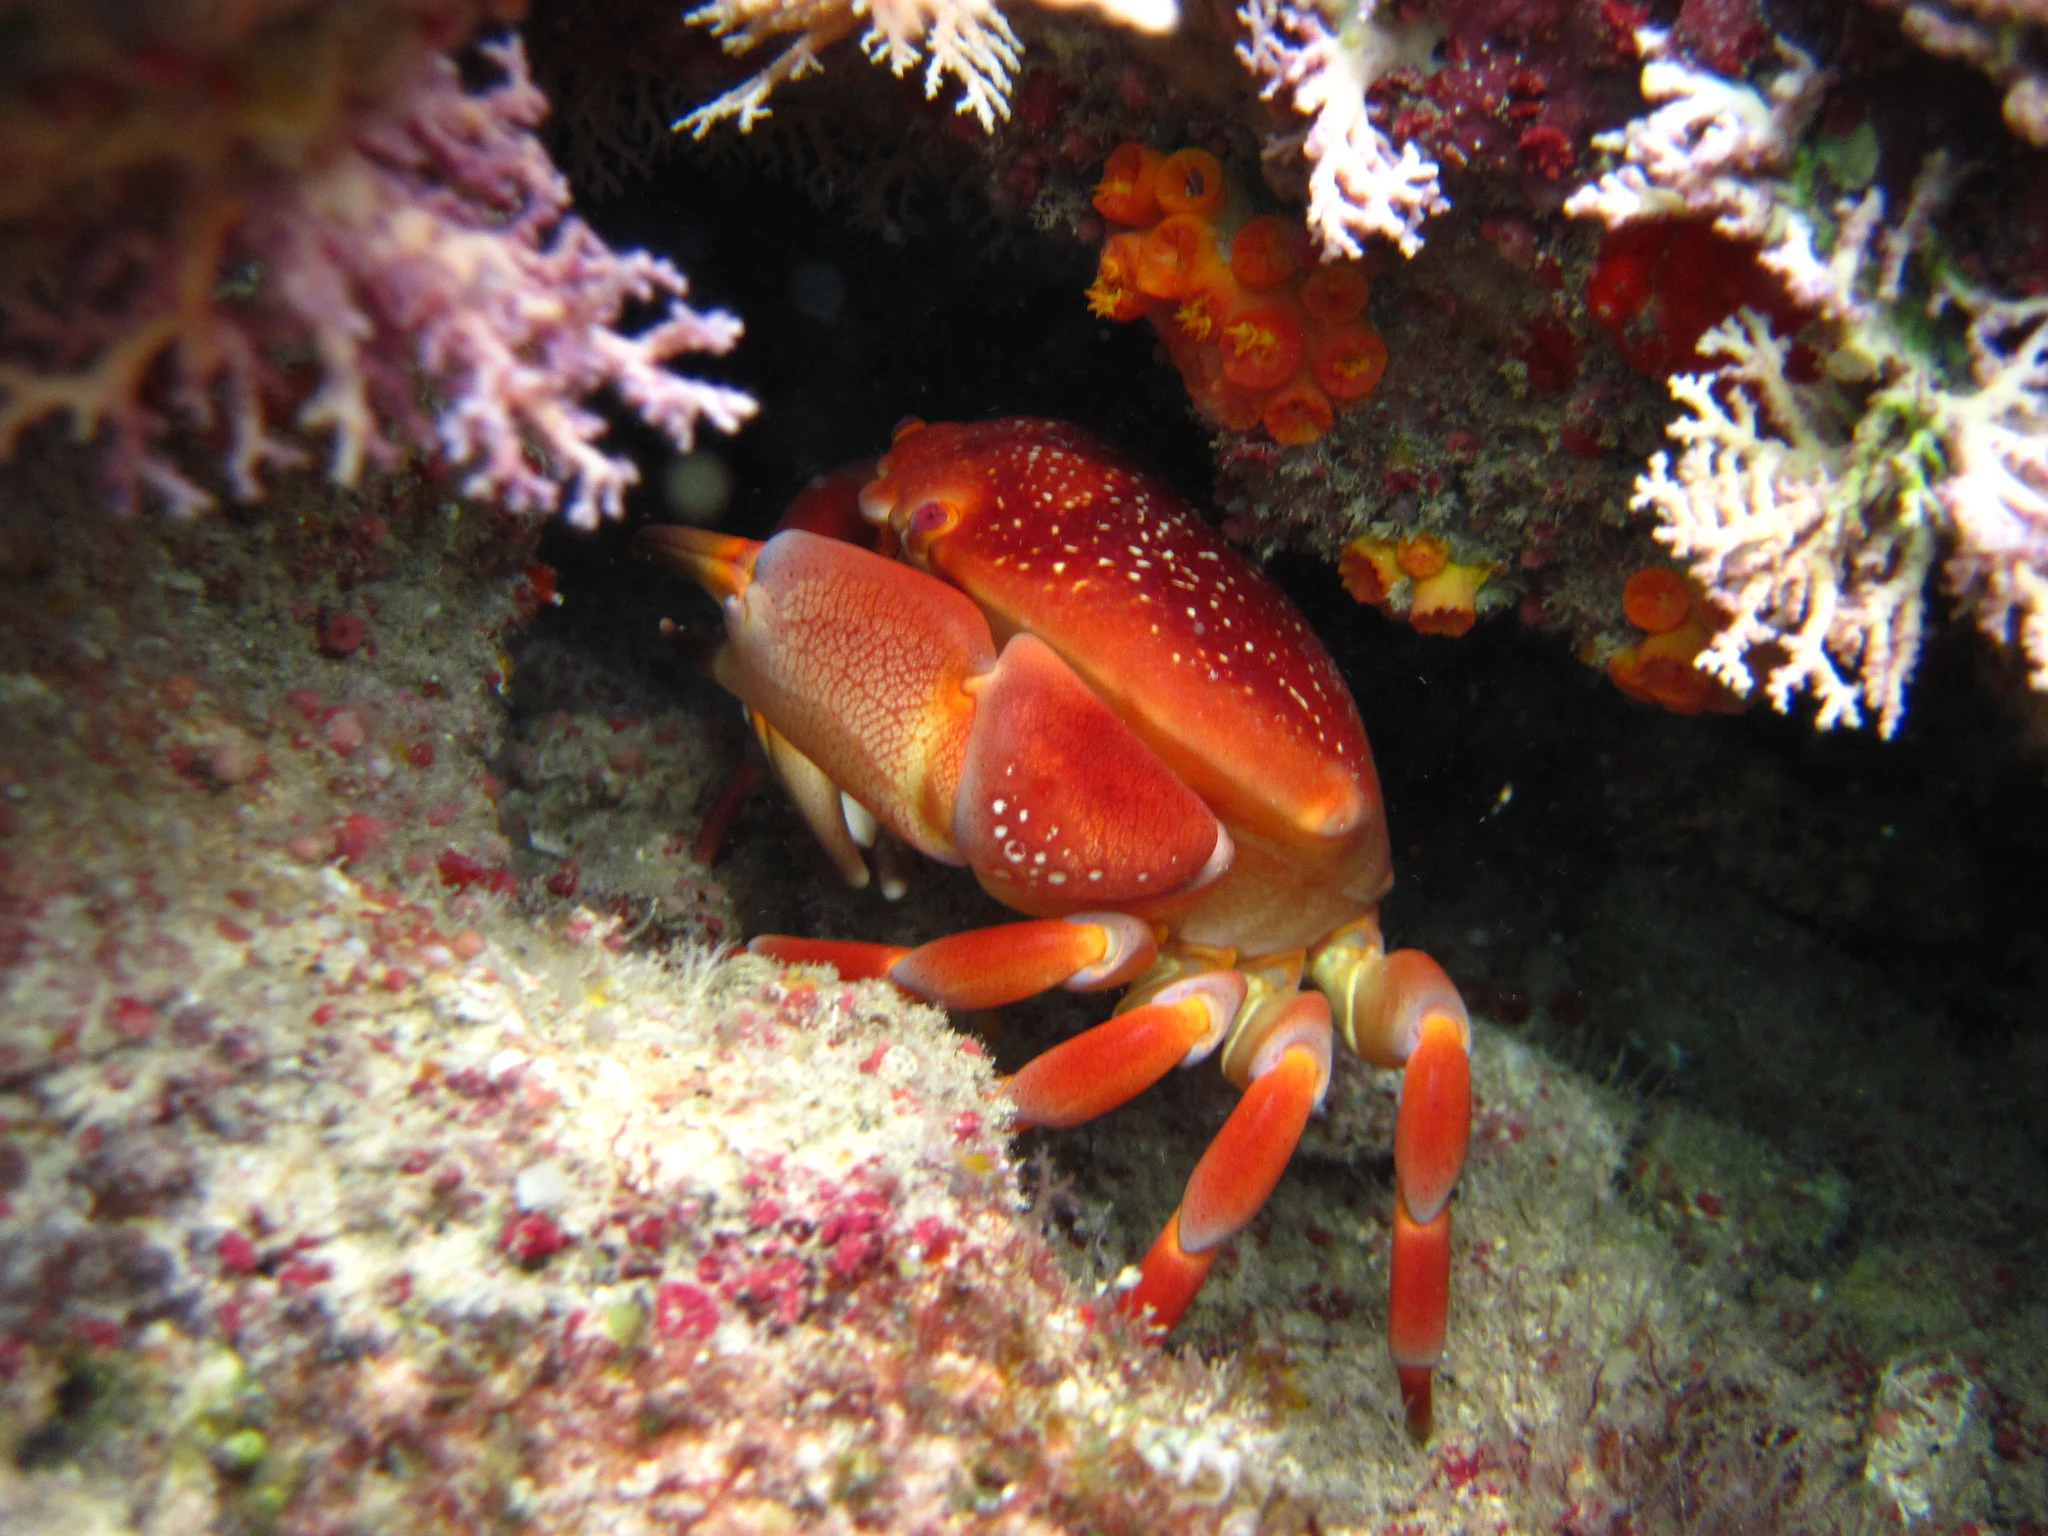 crab in reef - Photo by RussPatBonaire at flickr